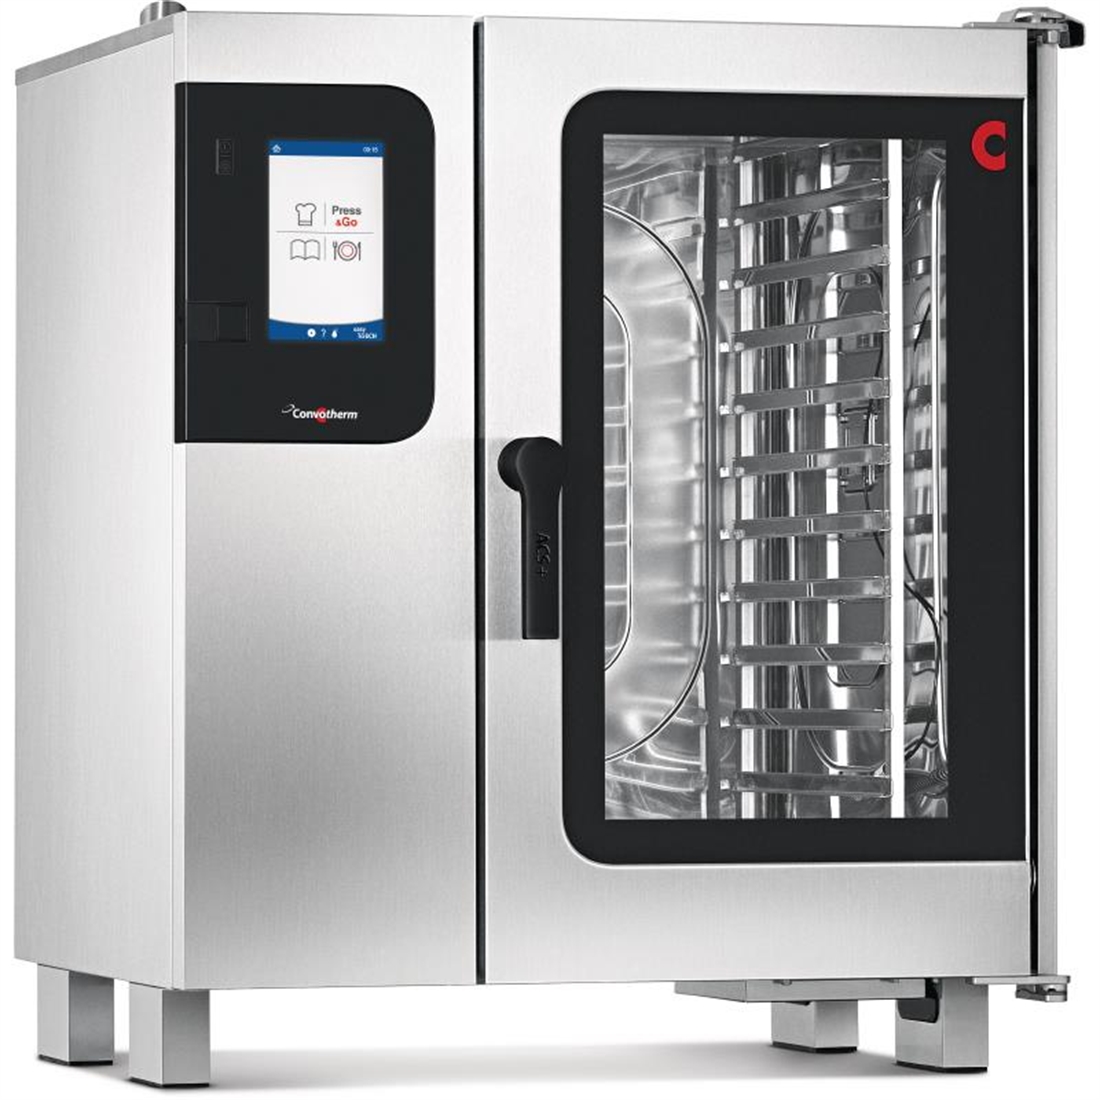 Convotherm 4 easyTouch Combi Oven 10 x 1 x1 GN Grid with Smoker Grill and Install